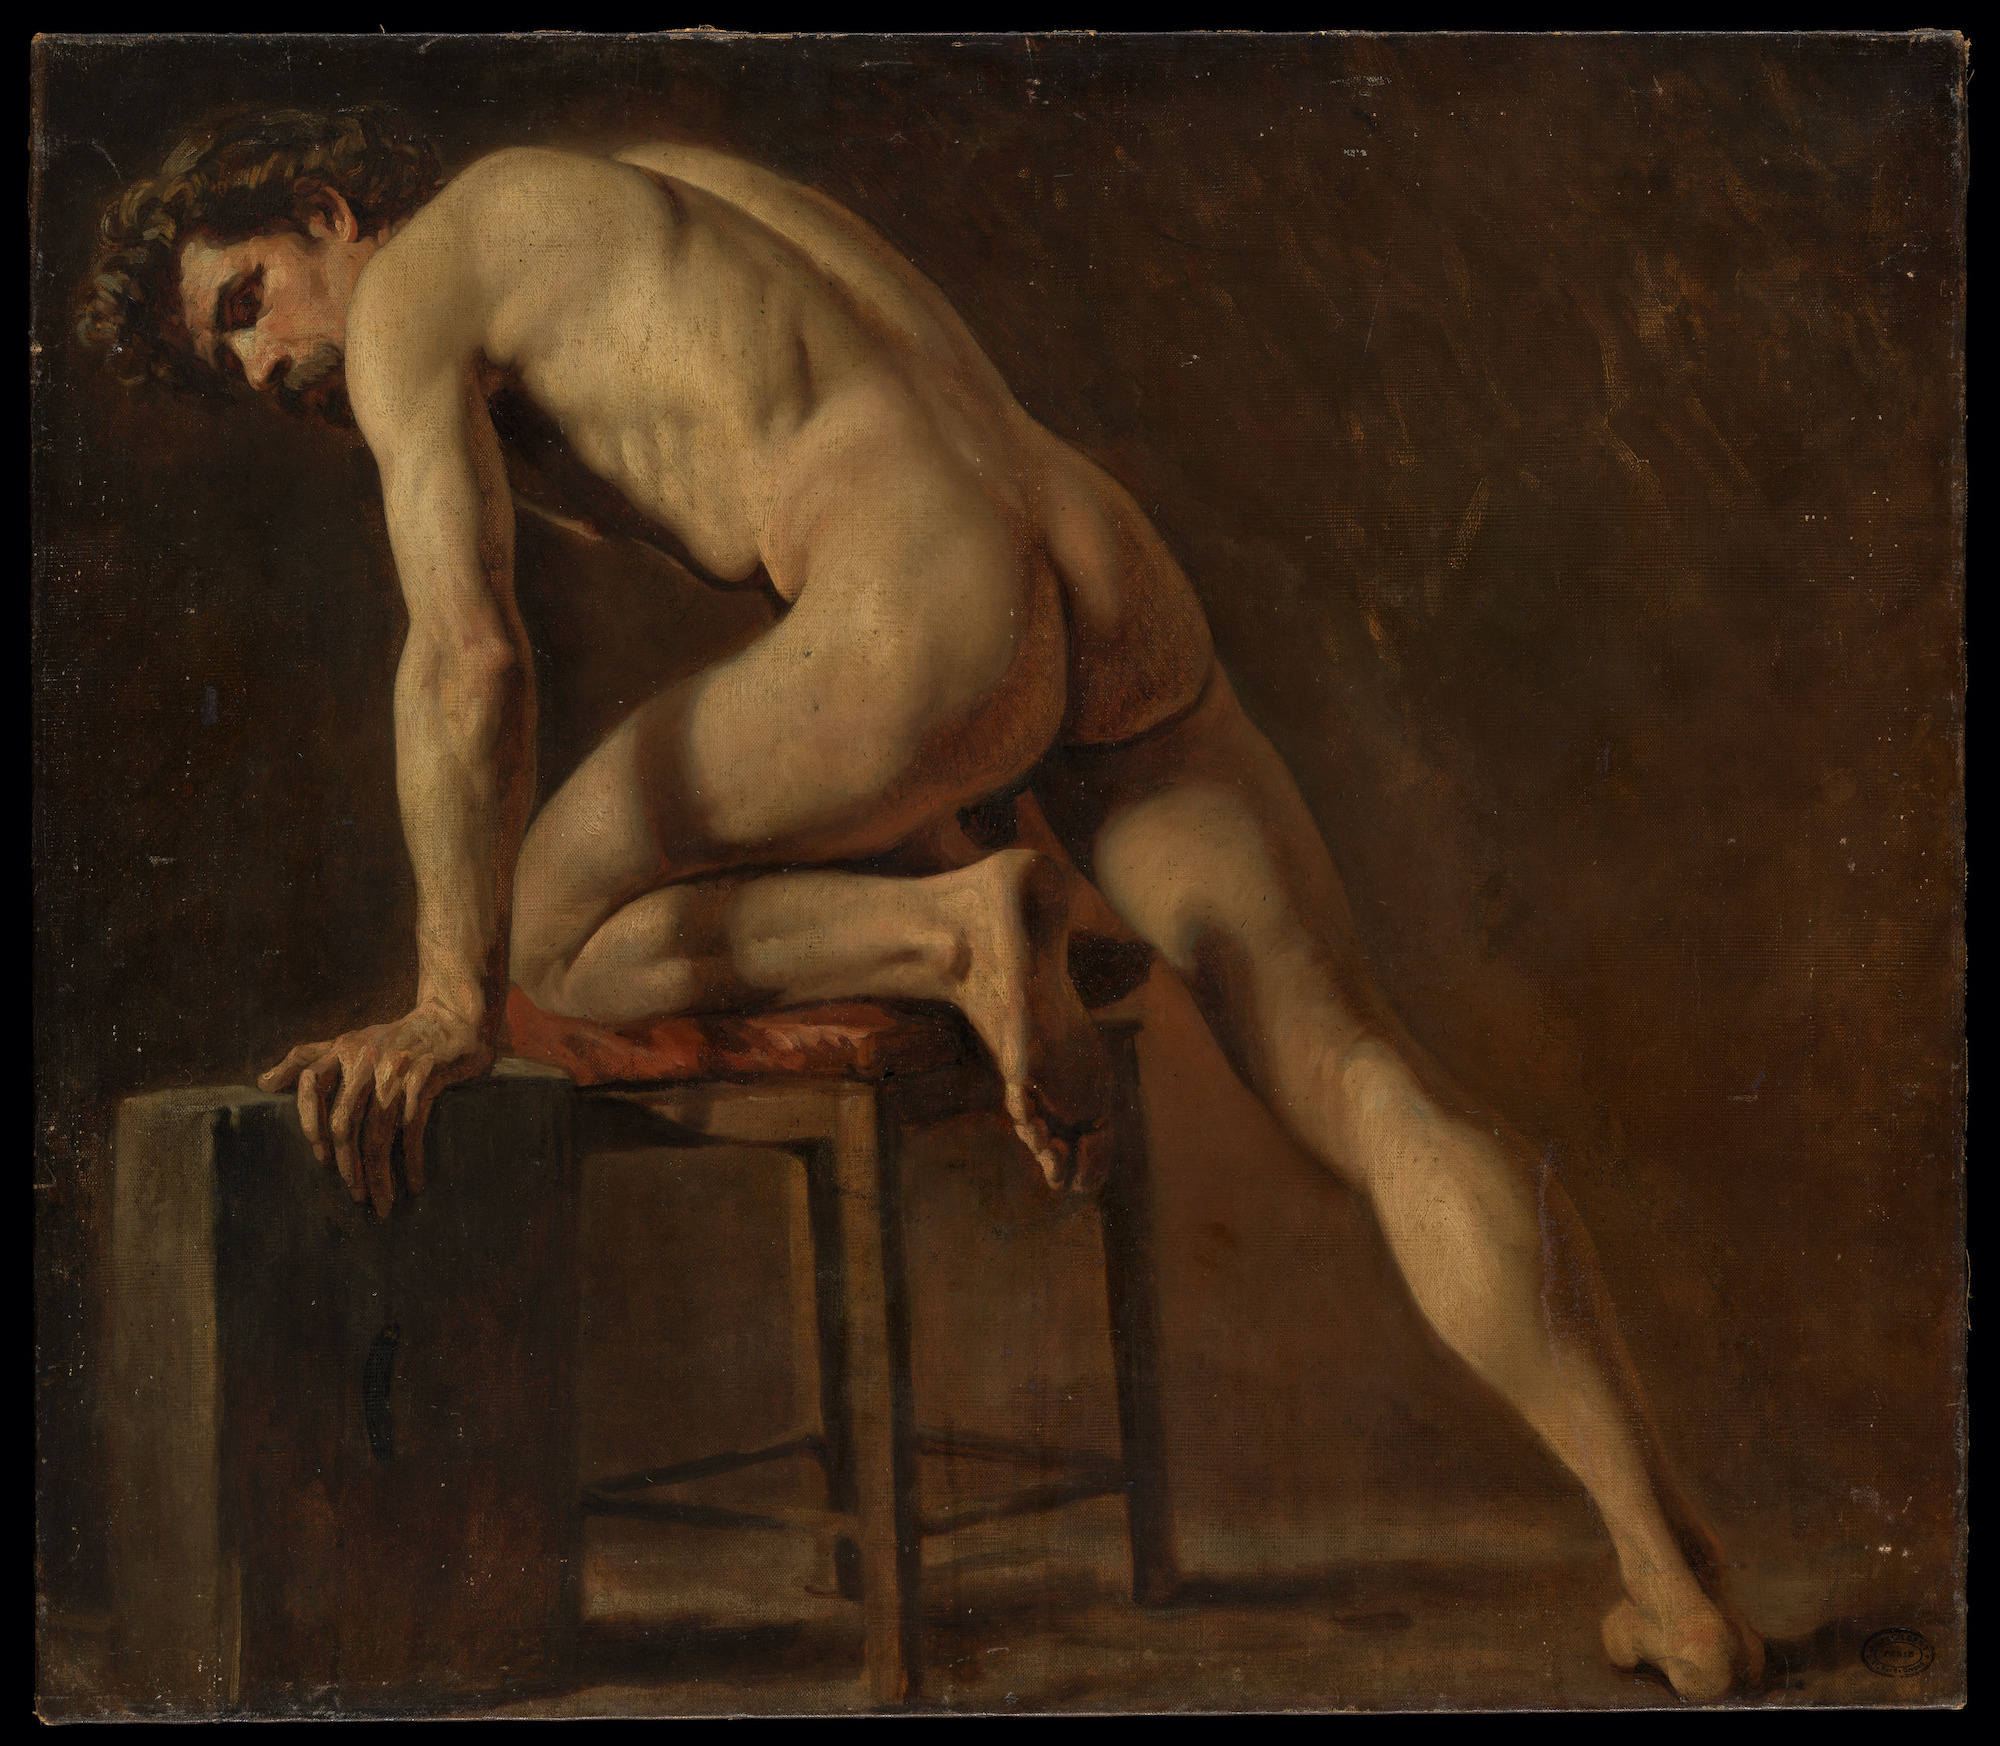 Study of a Nude Man by Gustave Courbet - early 1840s - 73.7 × 84.1 cm Metropolitan Museum of Art